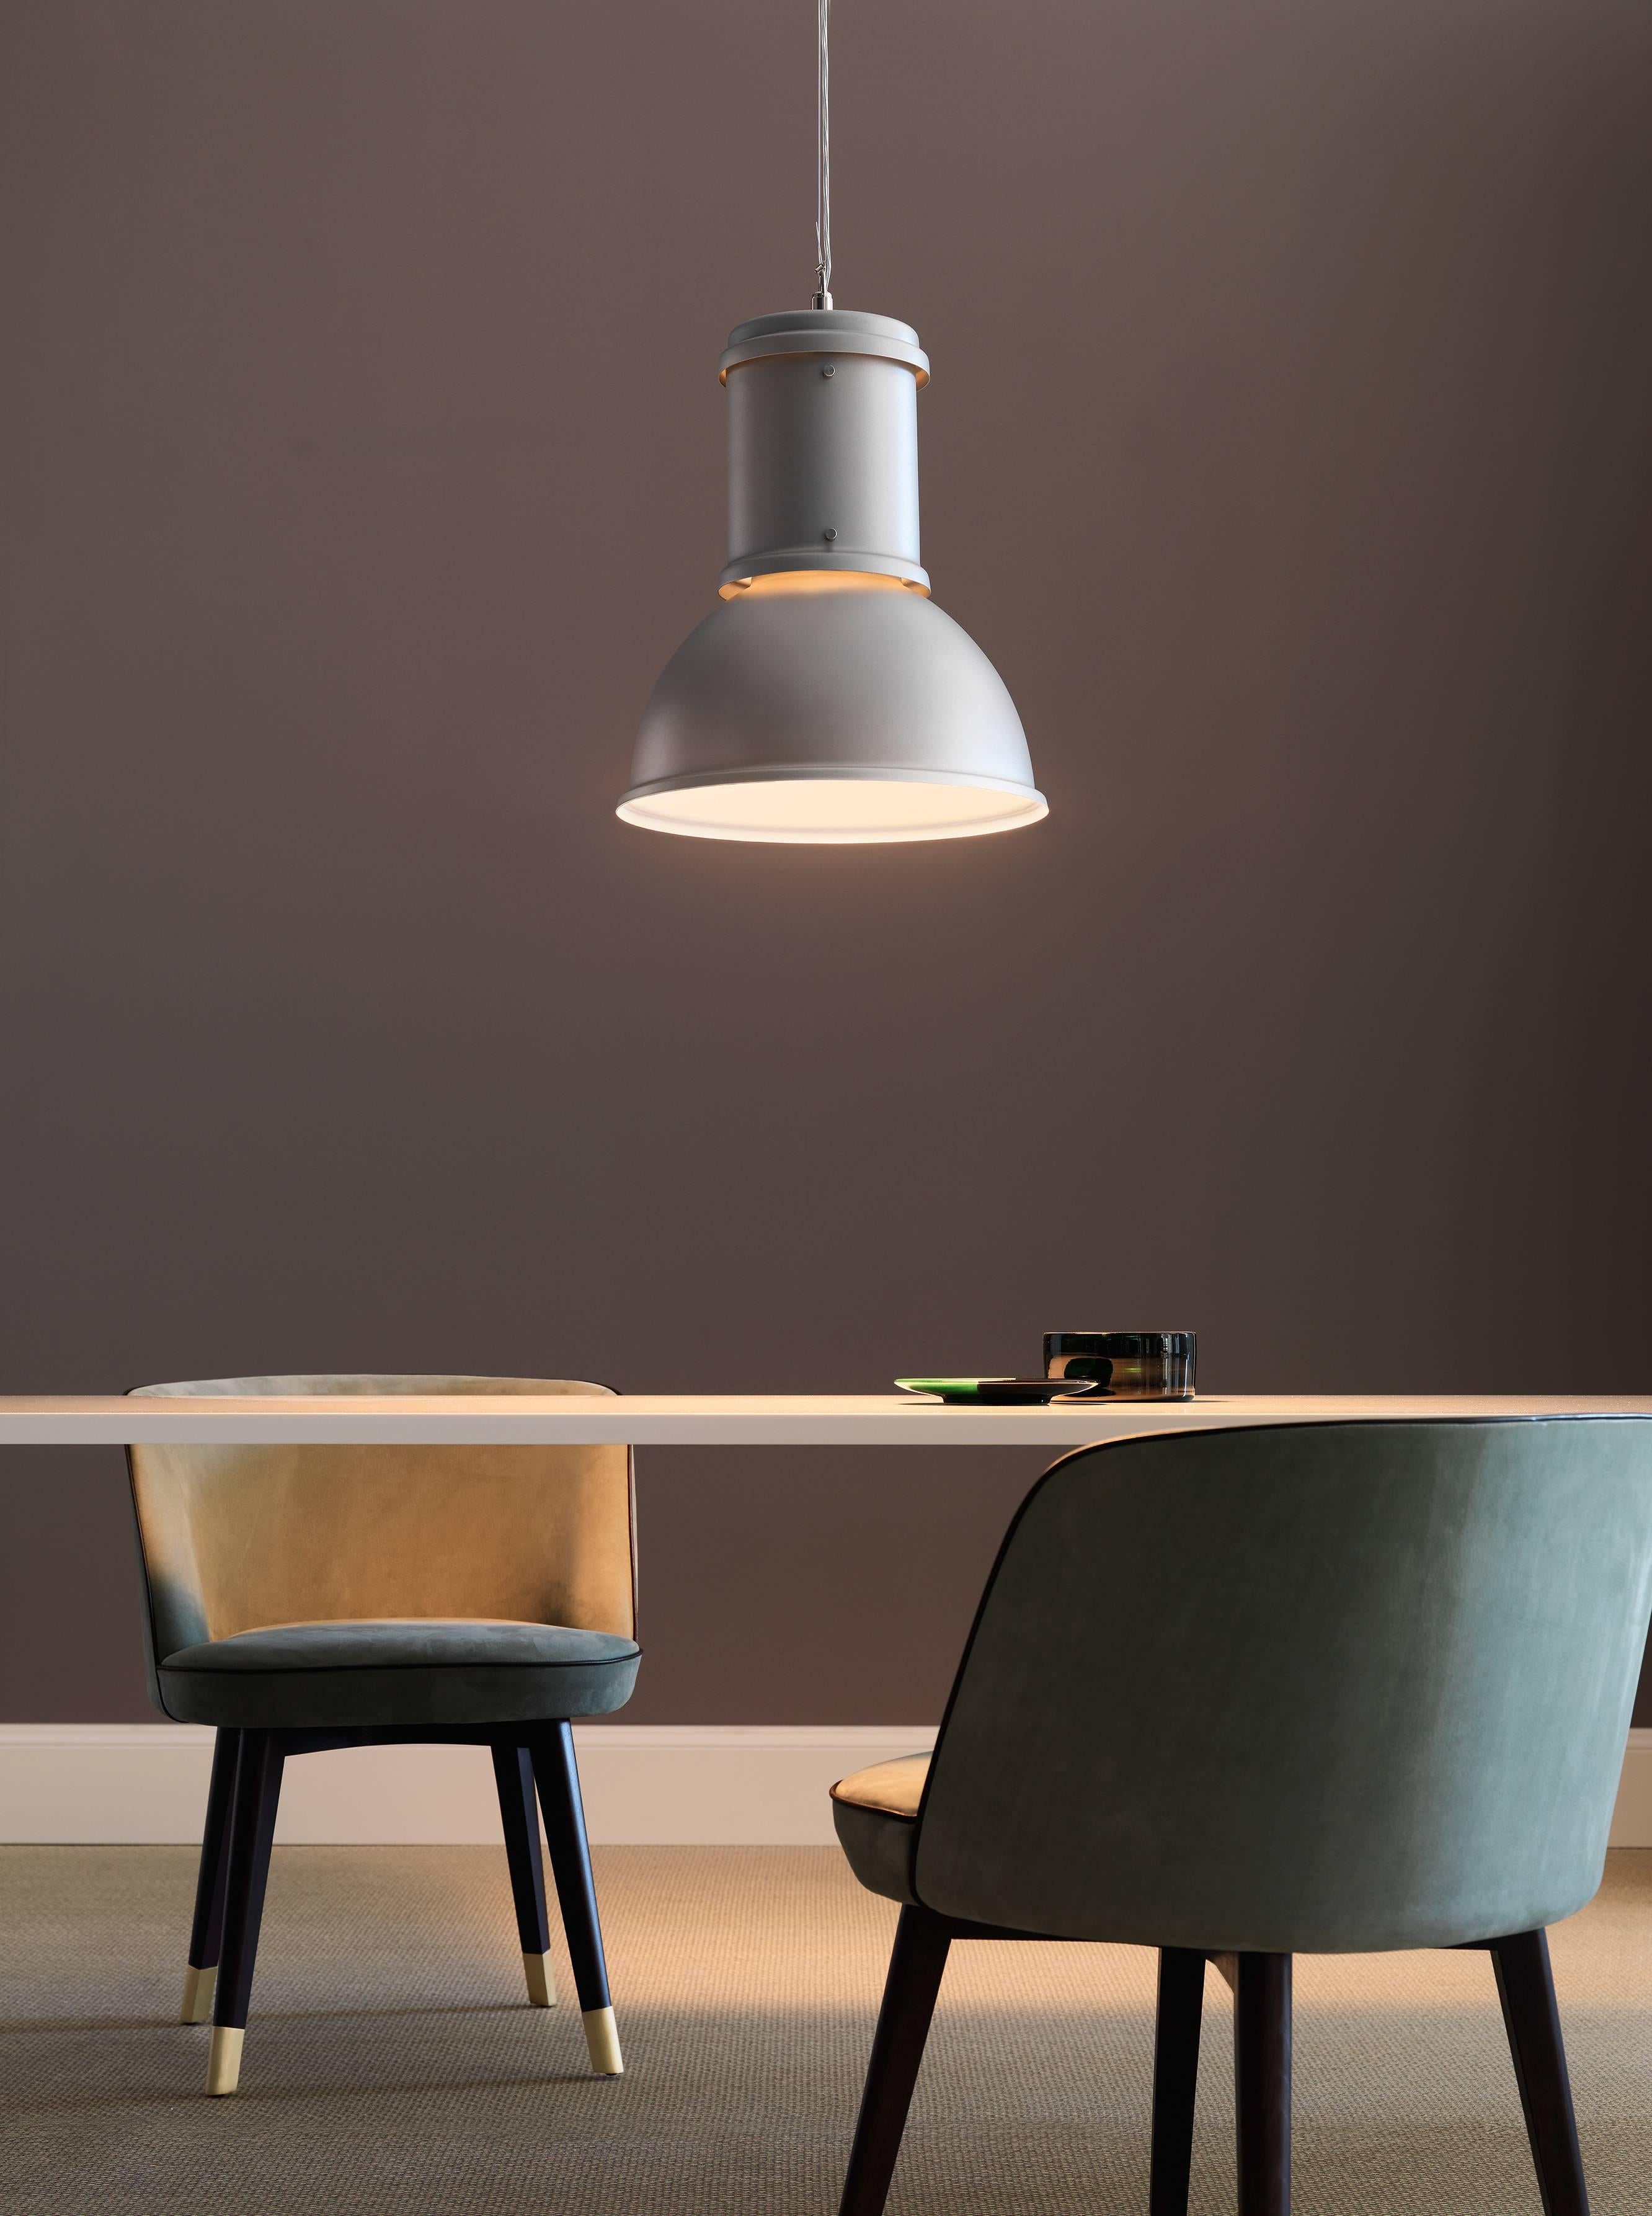 From the archives of Fontana Arte, the Lampara Suspension Lamp in natural
aluminium with white painted interior was designed in 1965. It is reminiscent of Industrial architecture, and has a natural or chromed aluminium shade and the reflector is